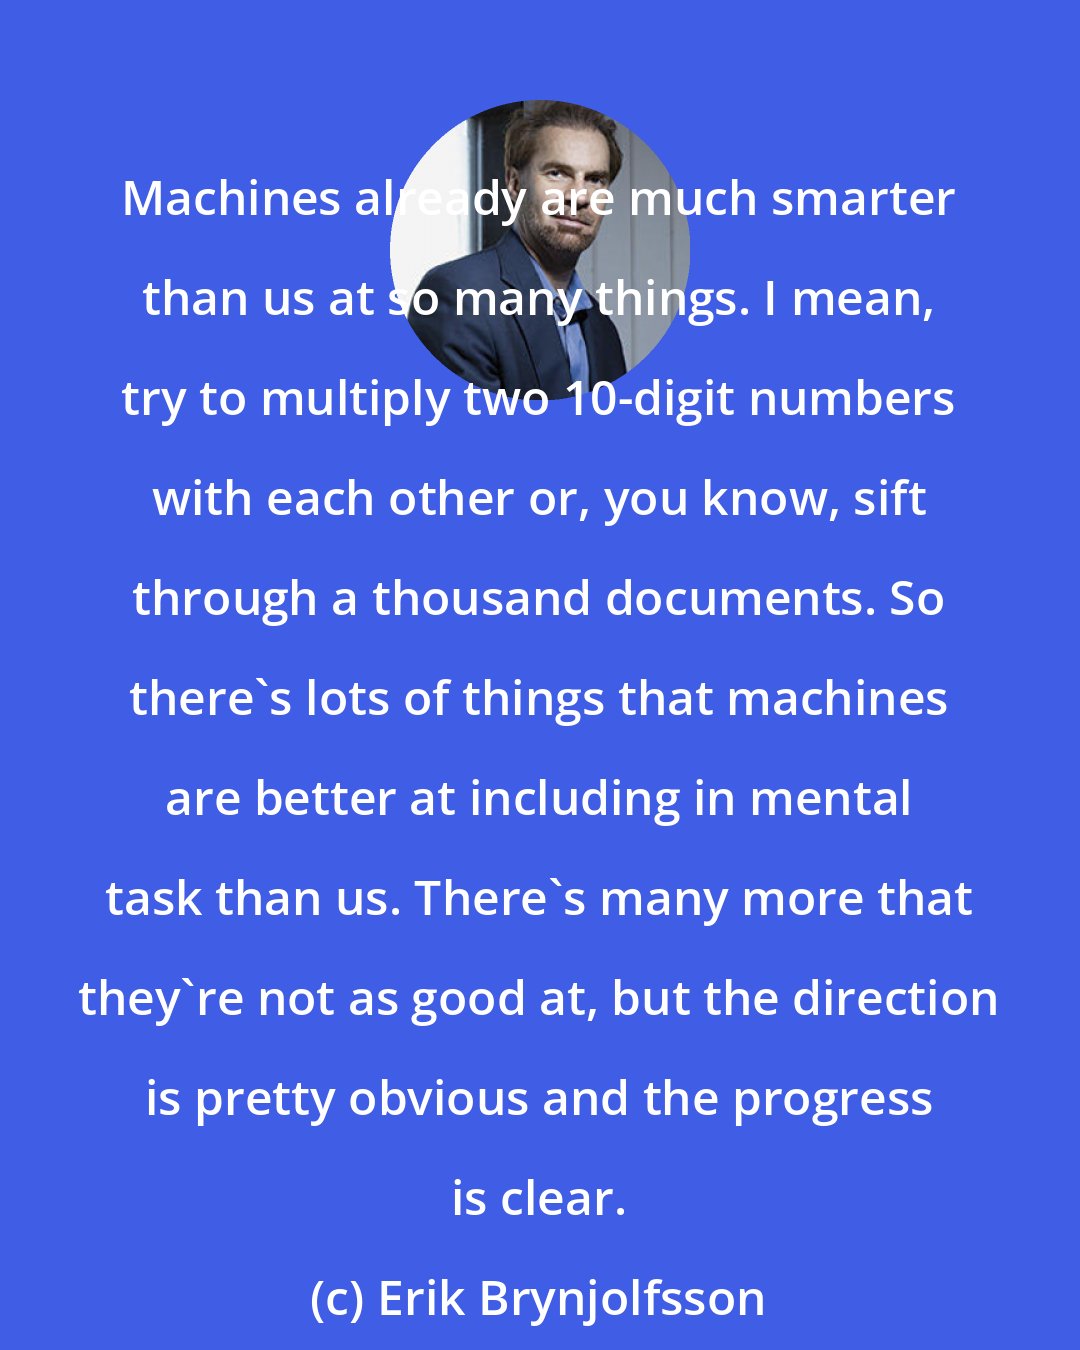 Erik Brynjolfsson: Machines already are much smarter than us at so many things. I mean, try to multiply two 10-digit numbers with each other or, you know, sift through a thousand documents. So there's lots of things that machines are better at including in mental task than us. There's many more that they're not as good at, but the direction is pretty obvious and the progress is clear.